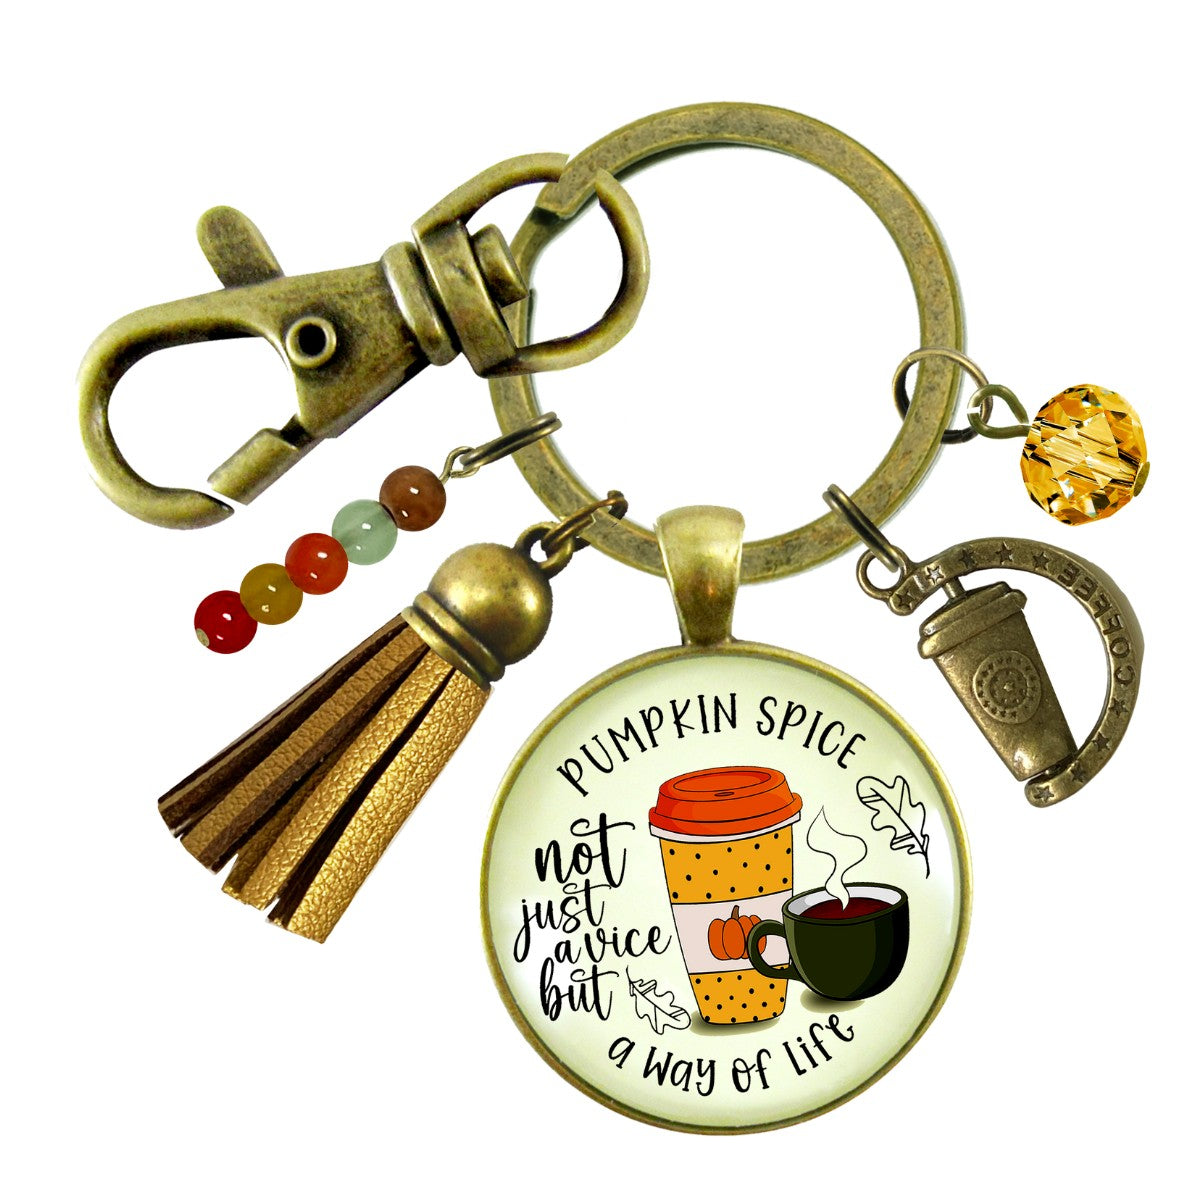 Pumpkin Spice Keychain Funny Quote Not a Vice, Way of Life Autumn PSL Coffee Latte Lover Costume Fashion Fall Jewelry For Women  Keychain - Women - Gutsy Goodness Handmade Jewelry